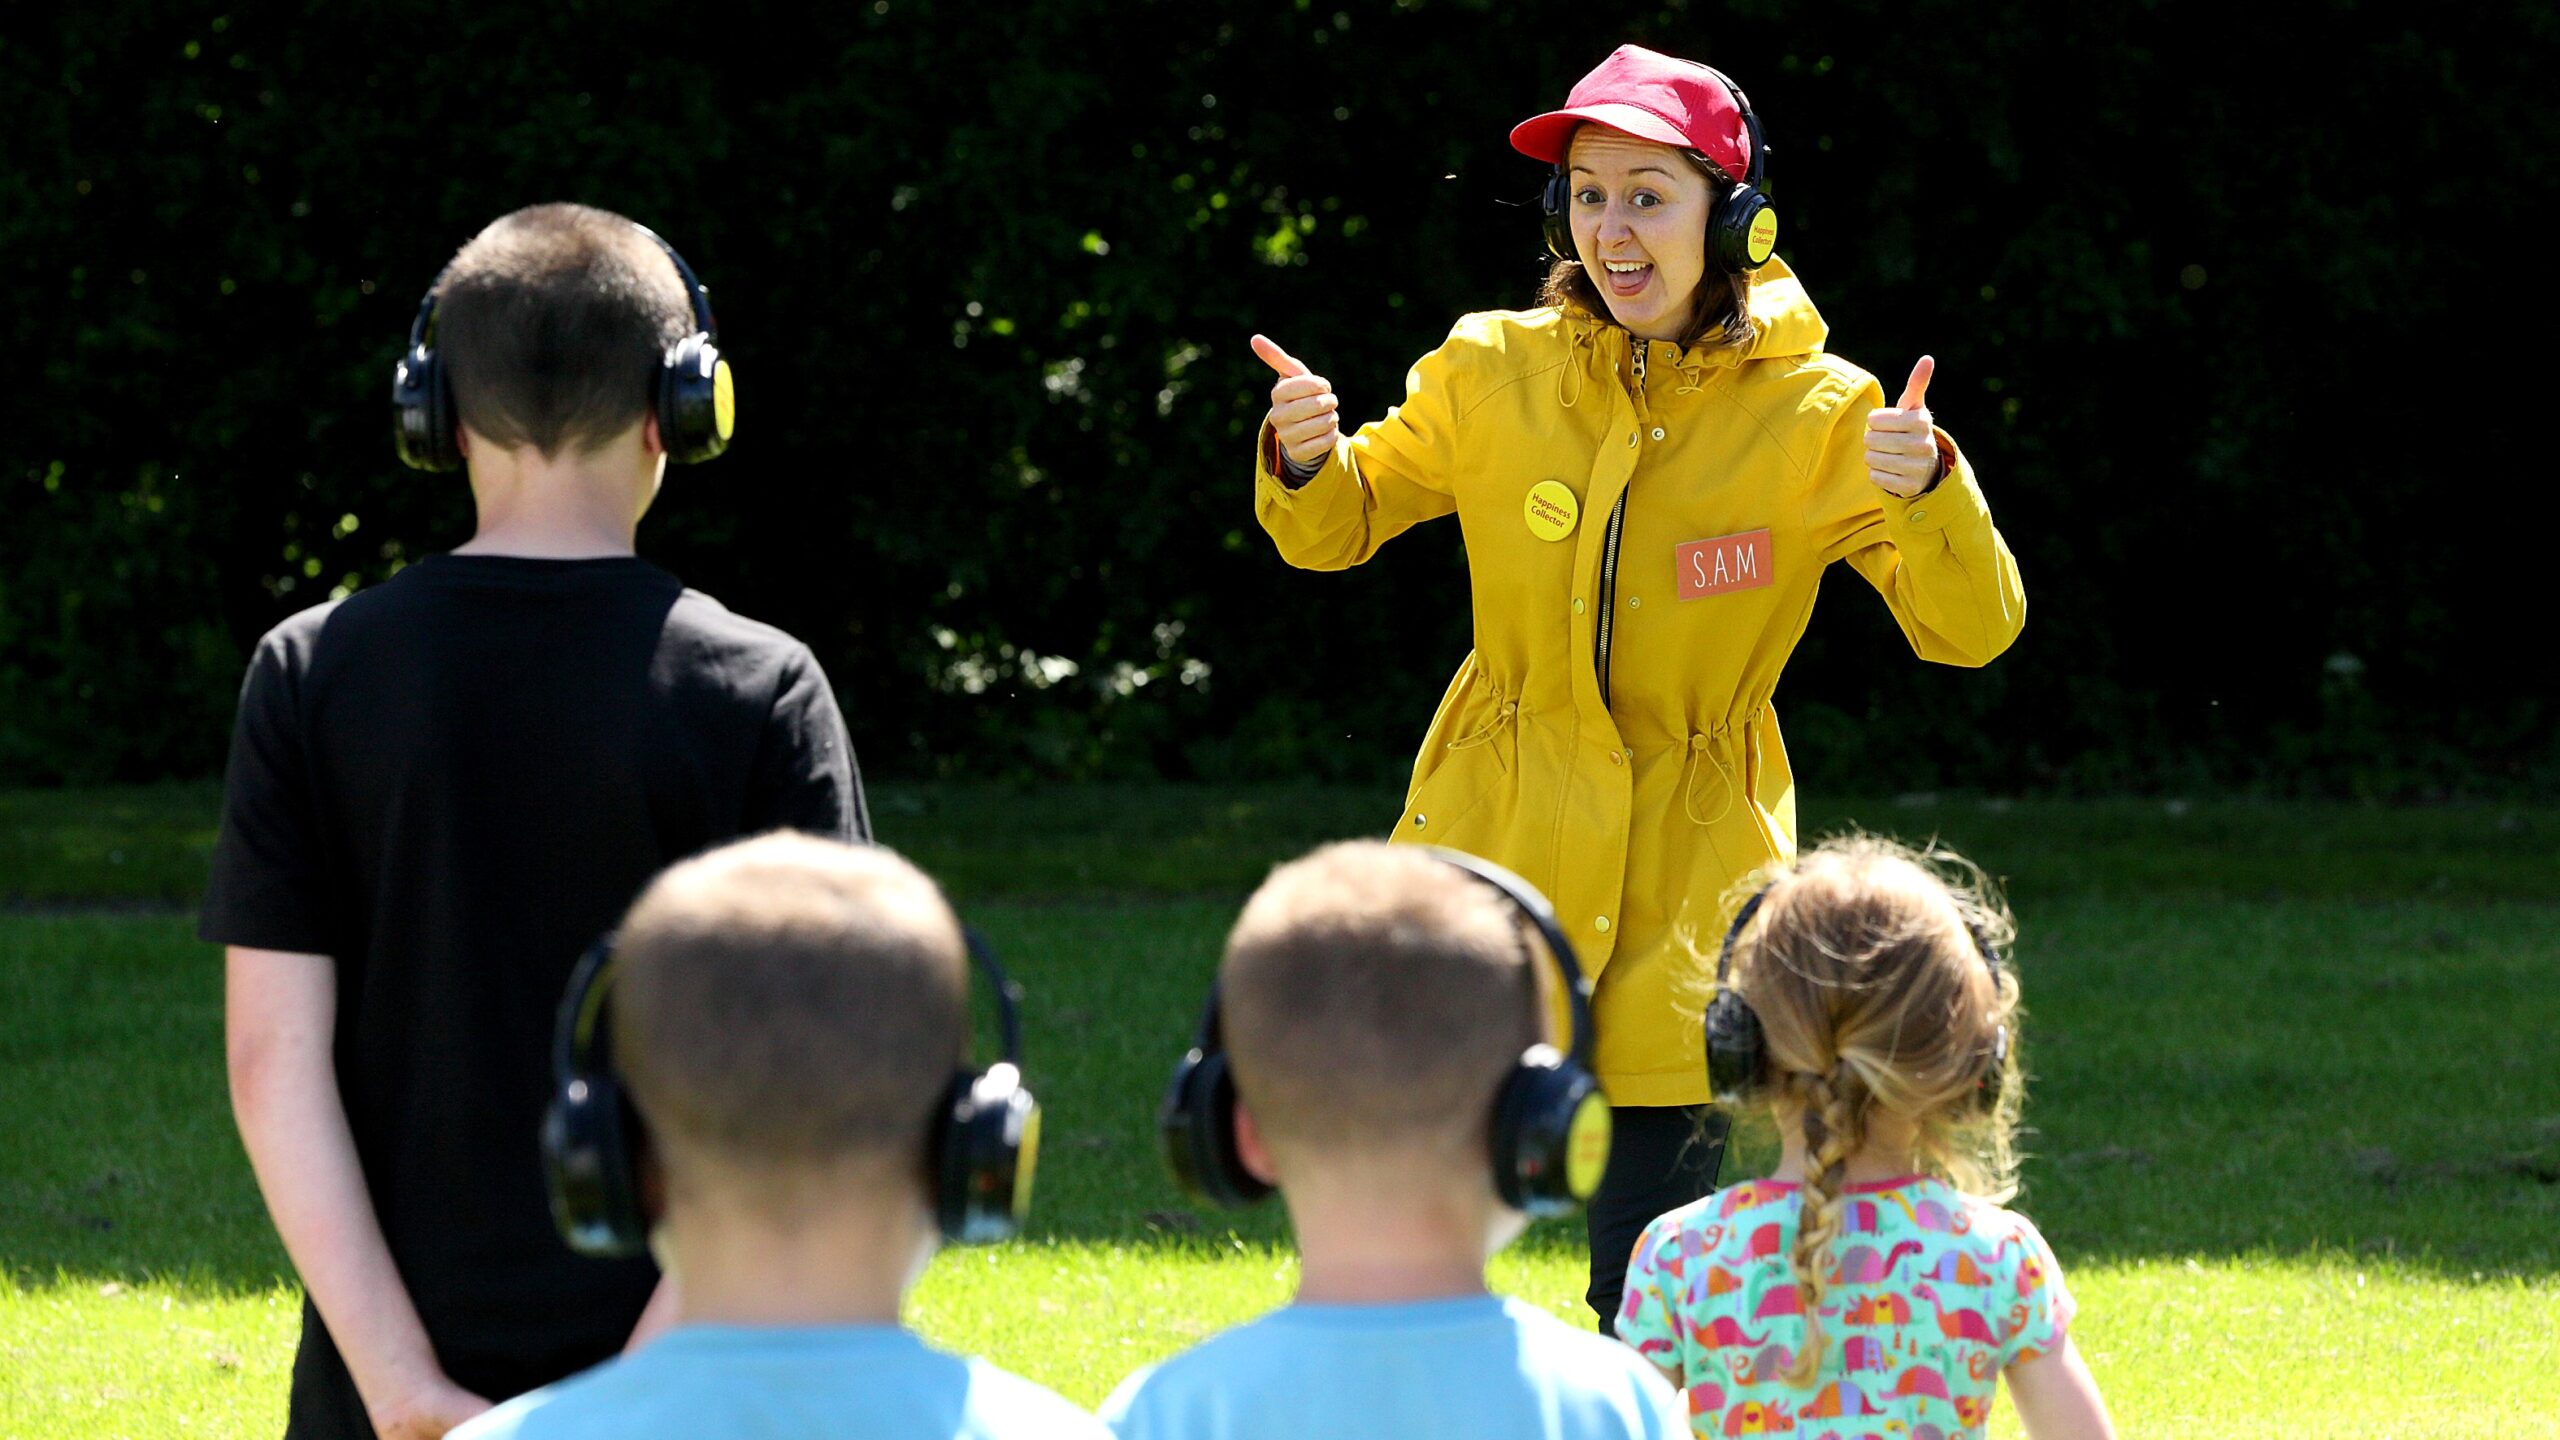 An adult in a yellow rain jacket and red baseball had is standing in front of four kids. The person is smiling with their thumbs up. Everyone is wearing black headphones outside a sunny day.